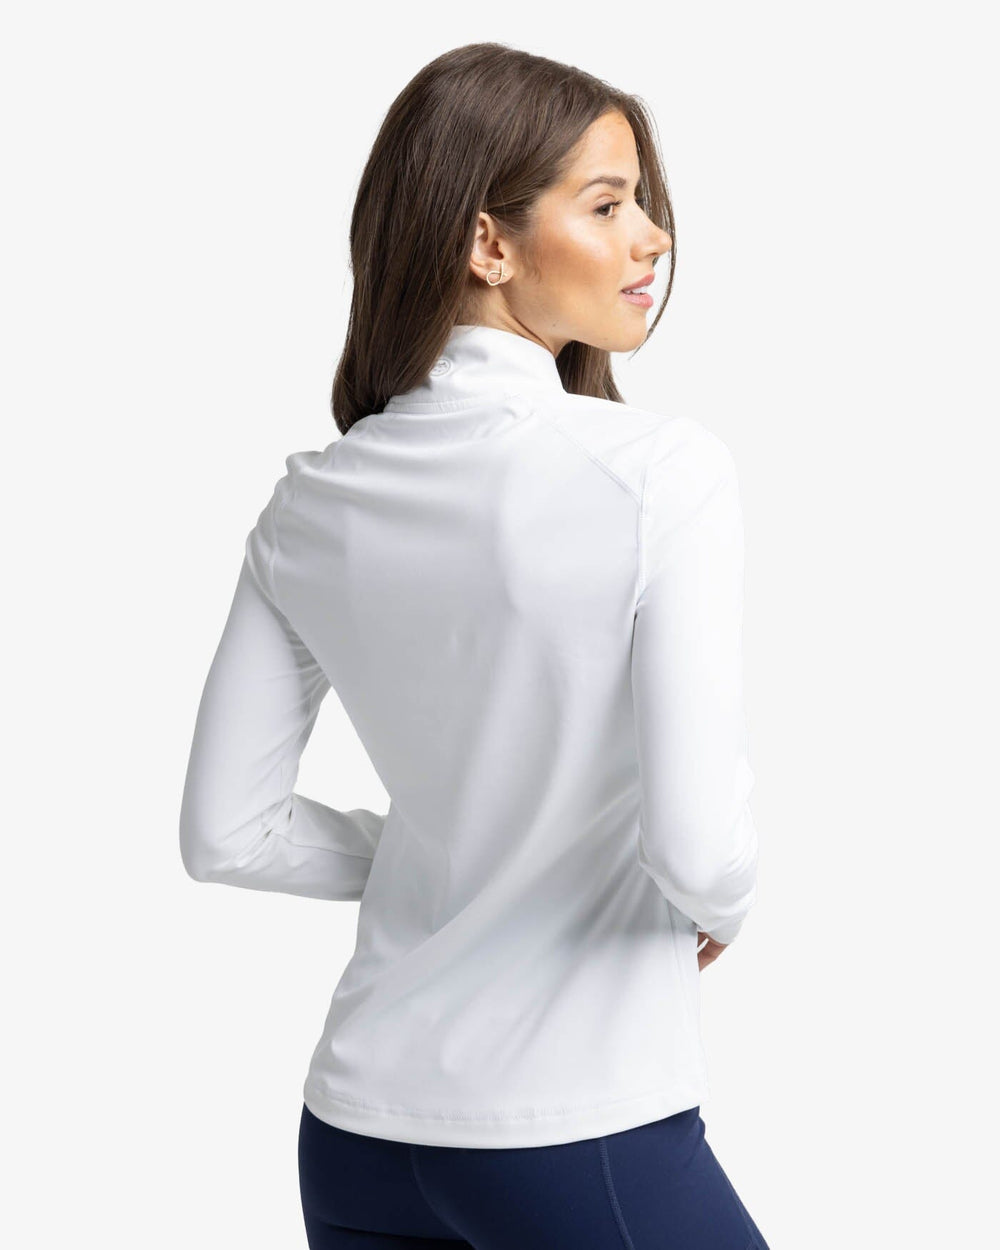 The back view of the Southern Tide Runaround Quarter Zip Pull Over by Southern Tide - Classic White